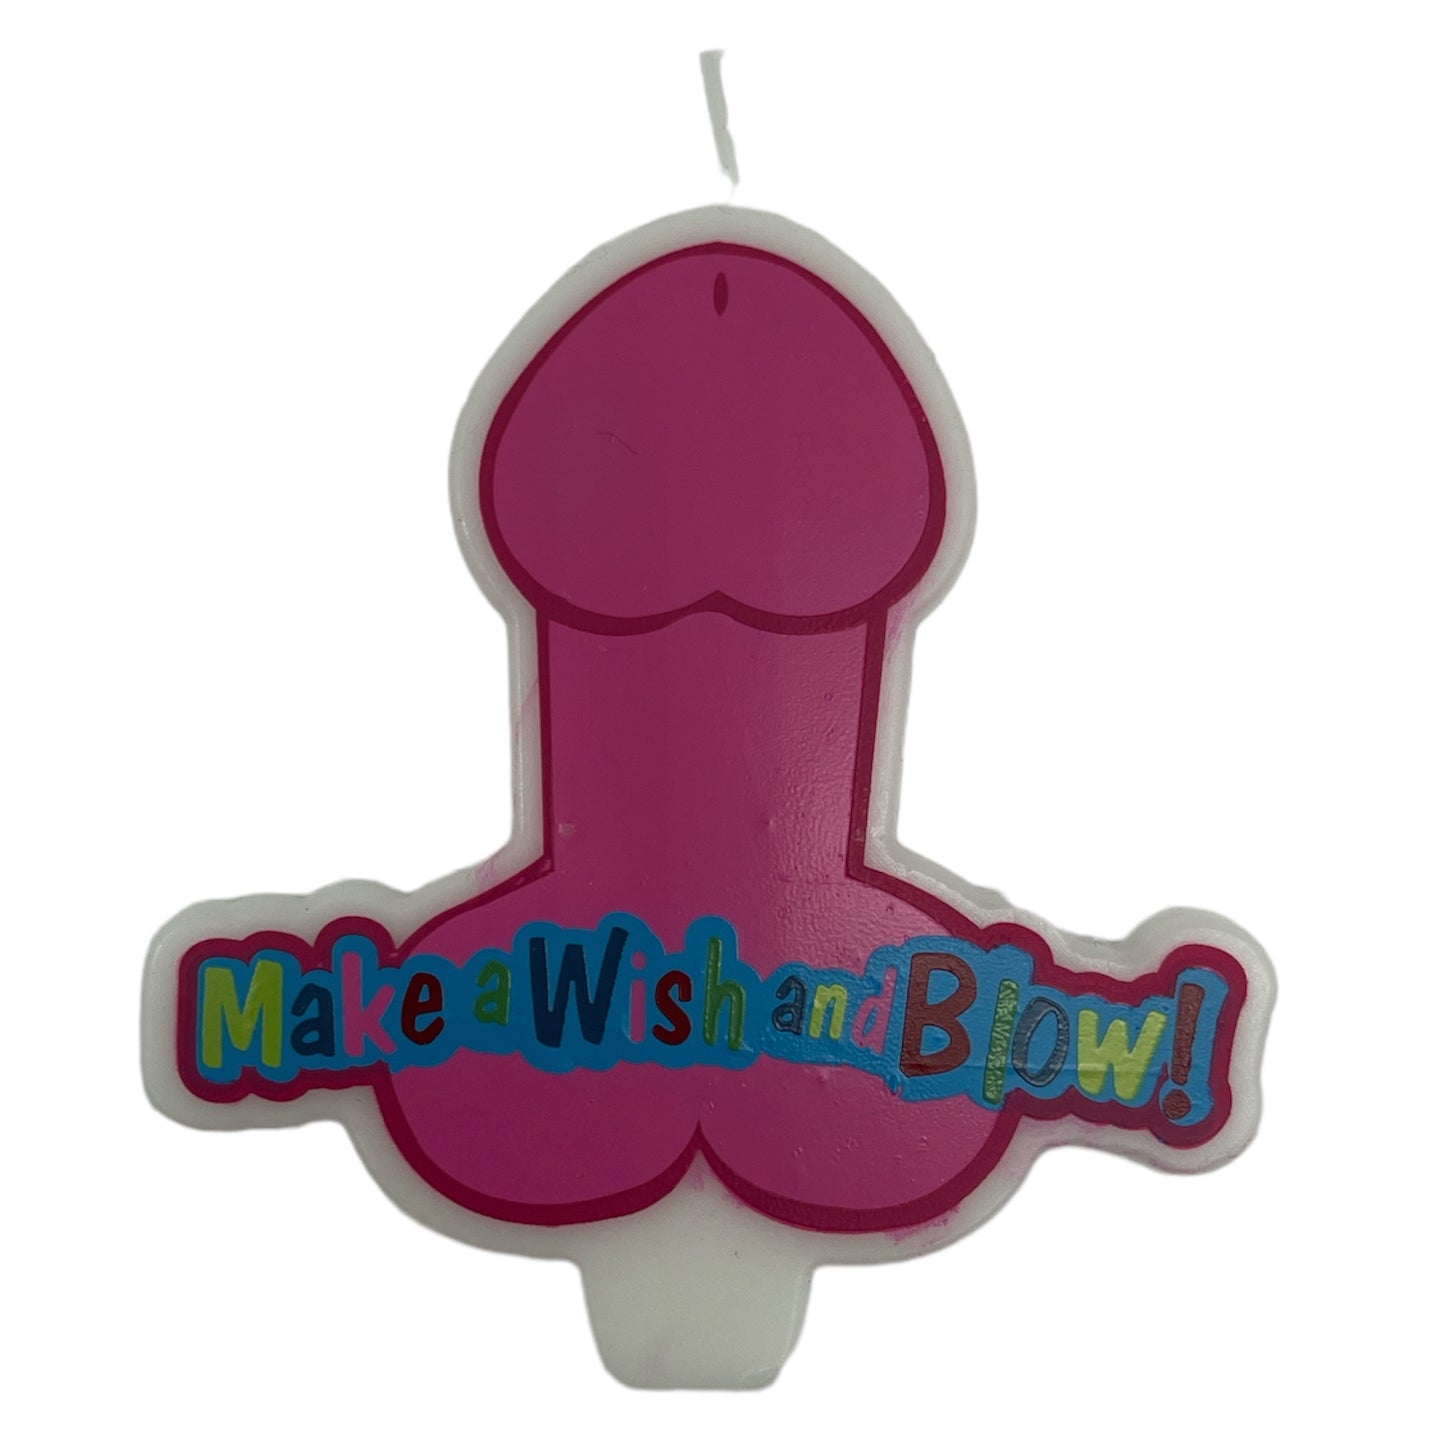 Dick Birthday Candle - Make a wish and blow!